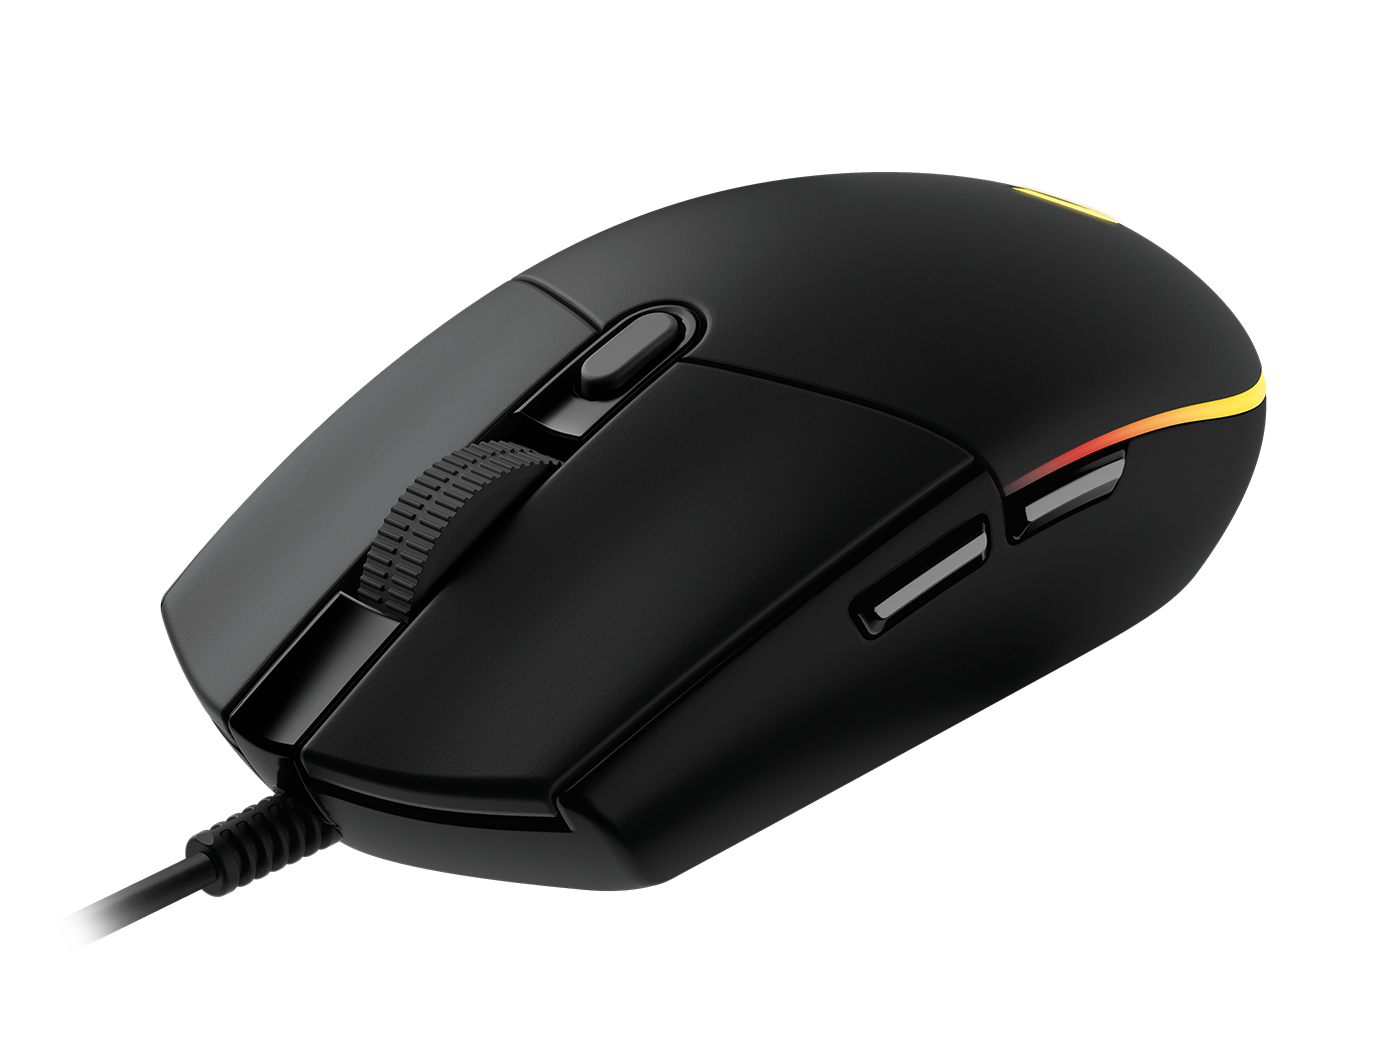 Logitech G203 Wired Gaming Mouse, 8,000 DPI, Rainbow Optical Effect LIGHTSYNC RGB, Programmable Buttons, On-Board Memory, Screen Mapping, PC Mac Com